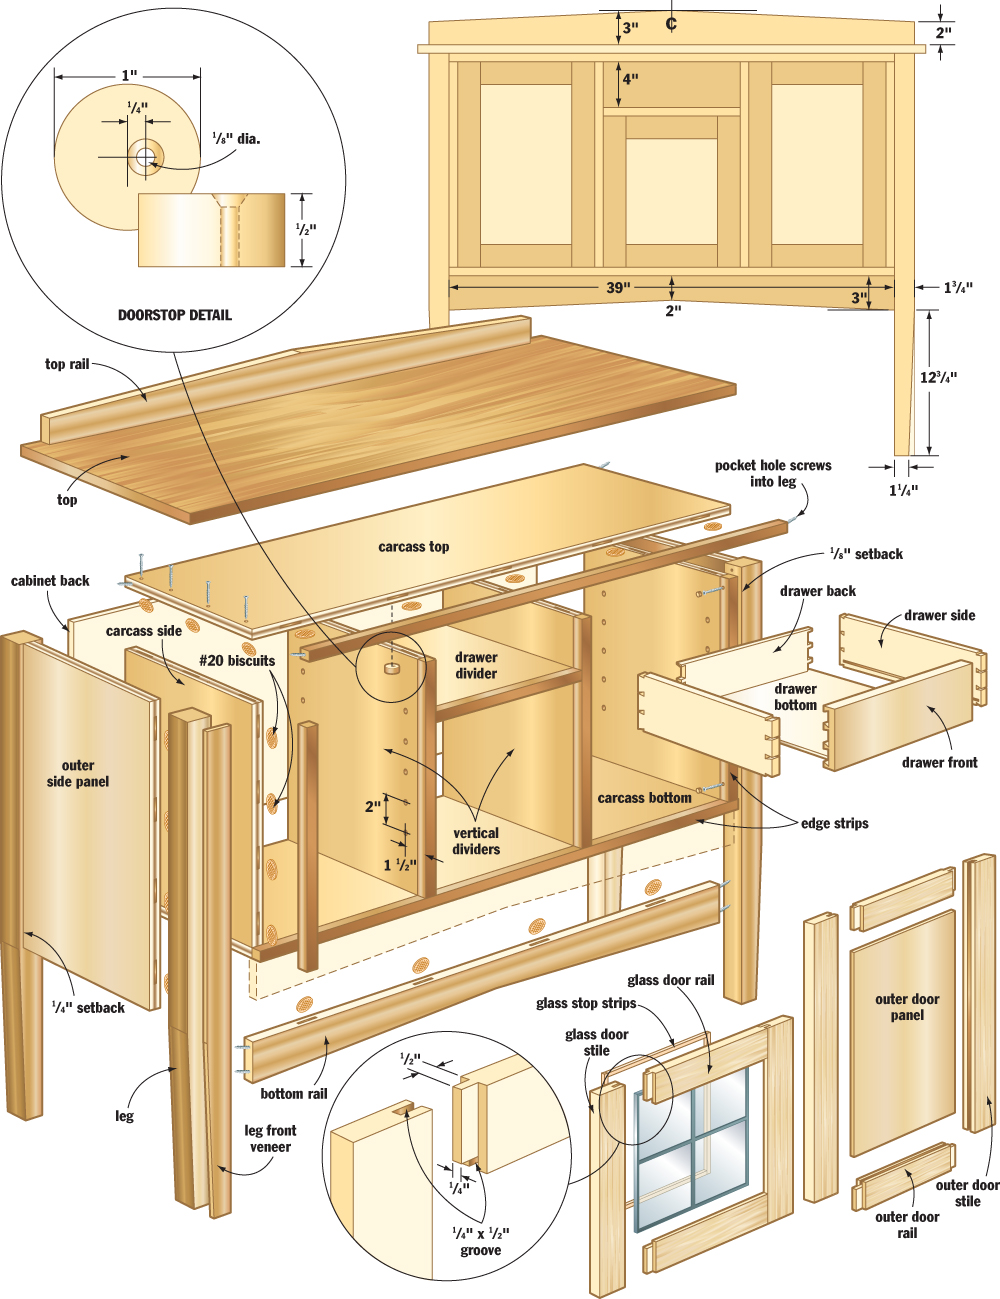 woodworking plans